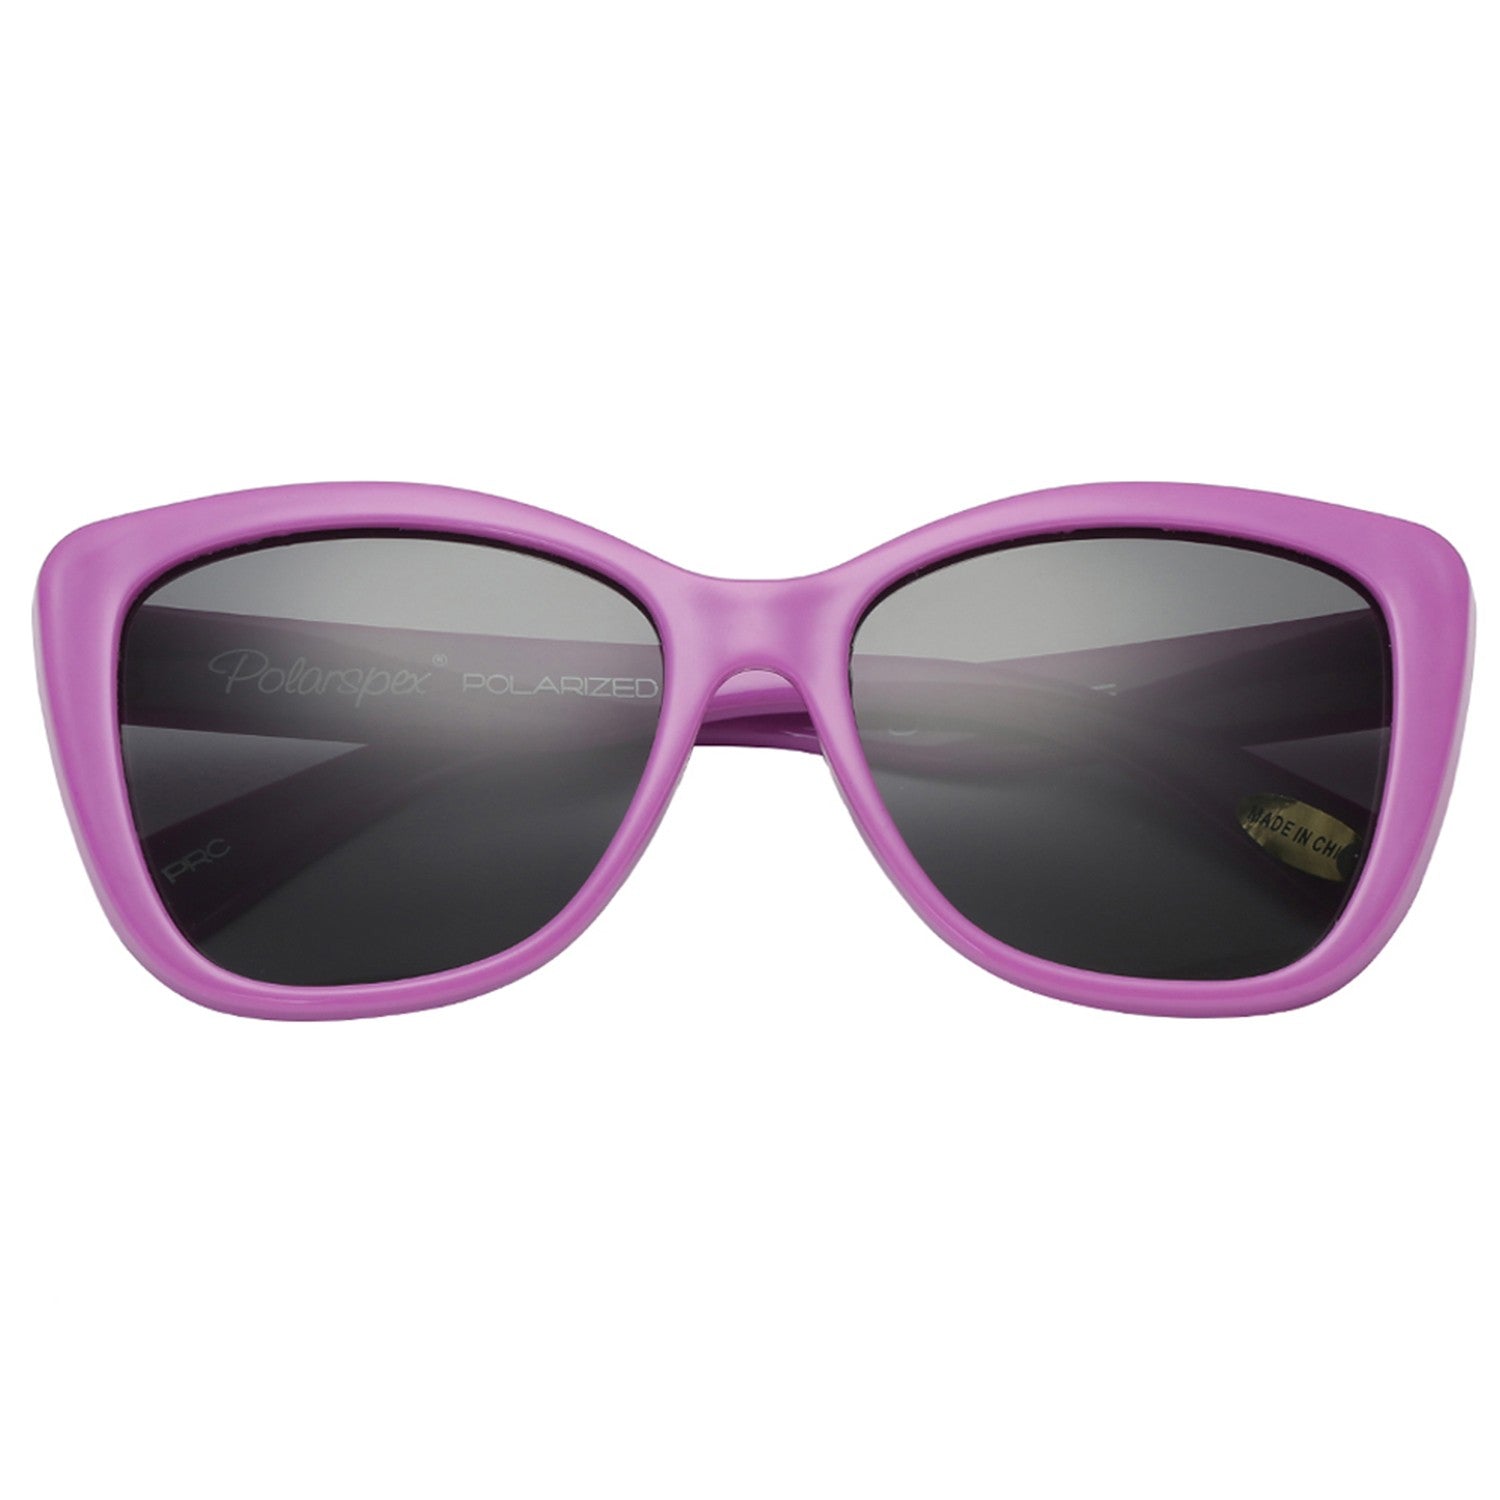 Polarspex Polarized Elastic Cateyes Style (BPA Free) Kids Sunglasses with Lavender Purple Frames and Polarized Smoke Lenses for Girls (Ages 3 - 10)